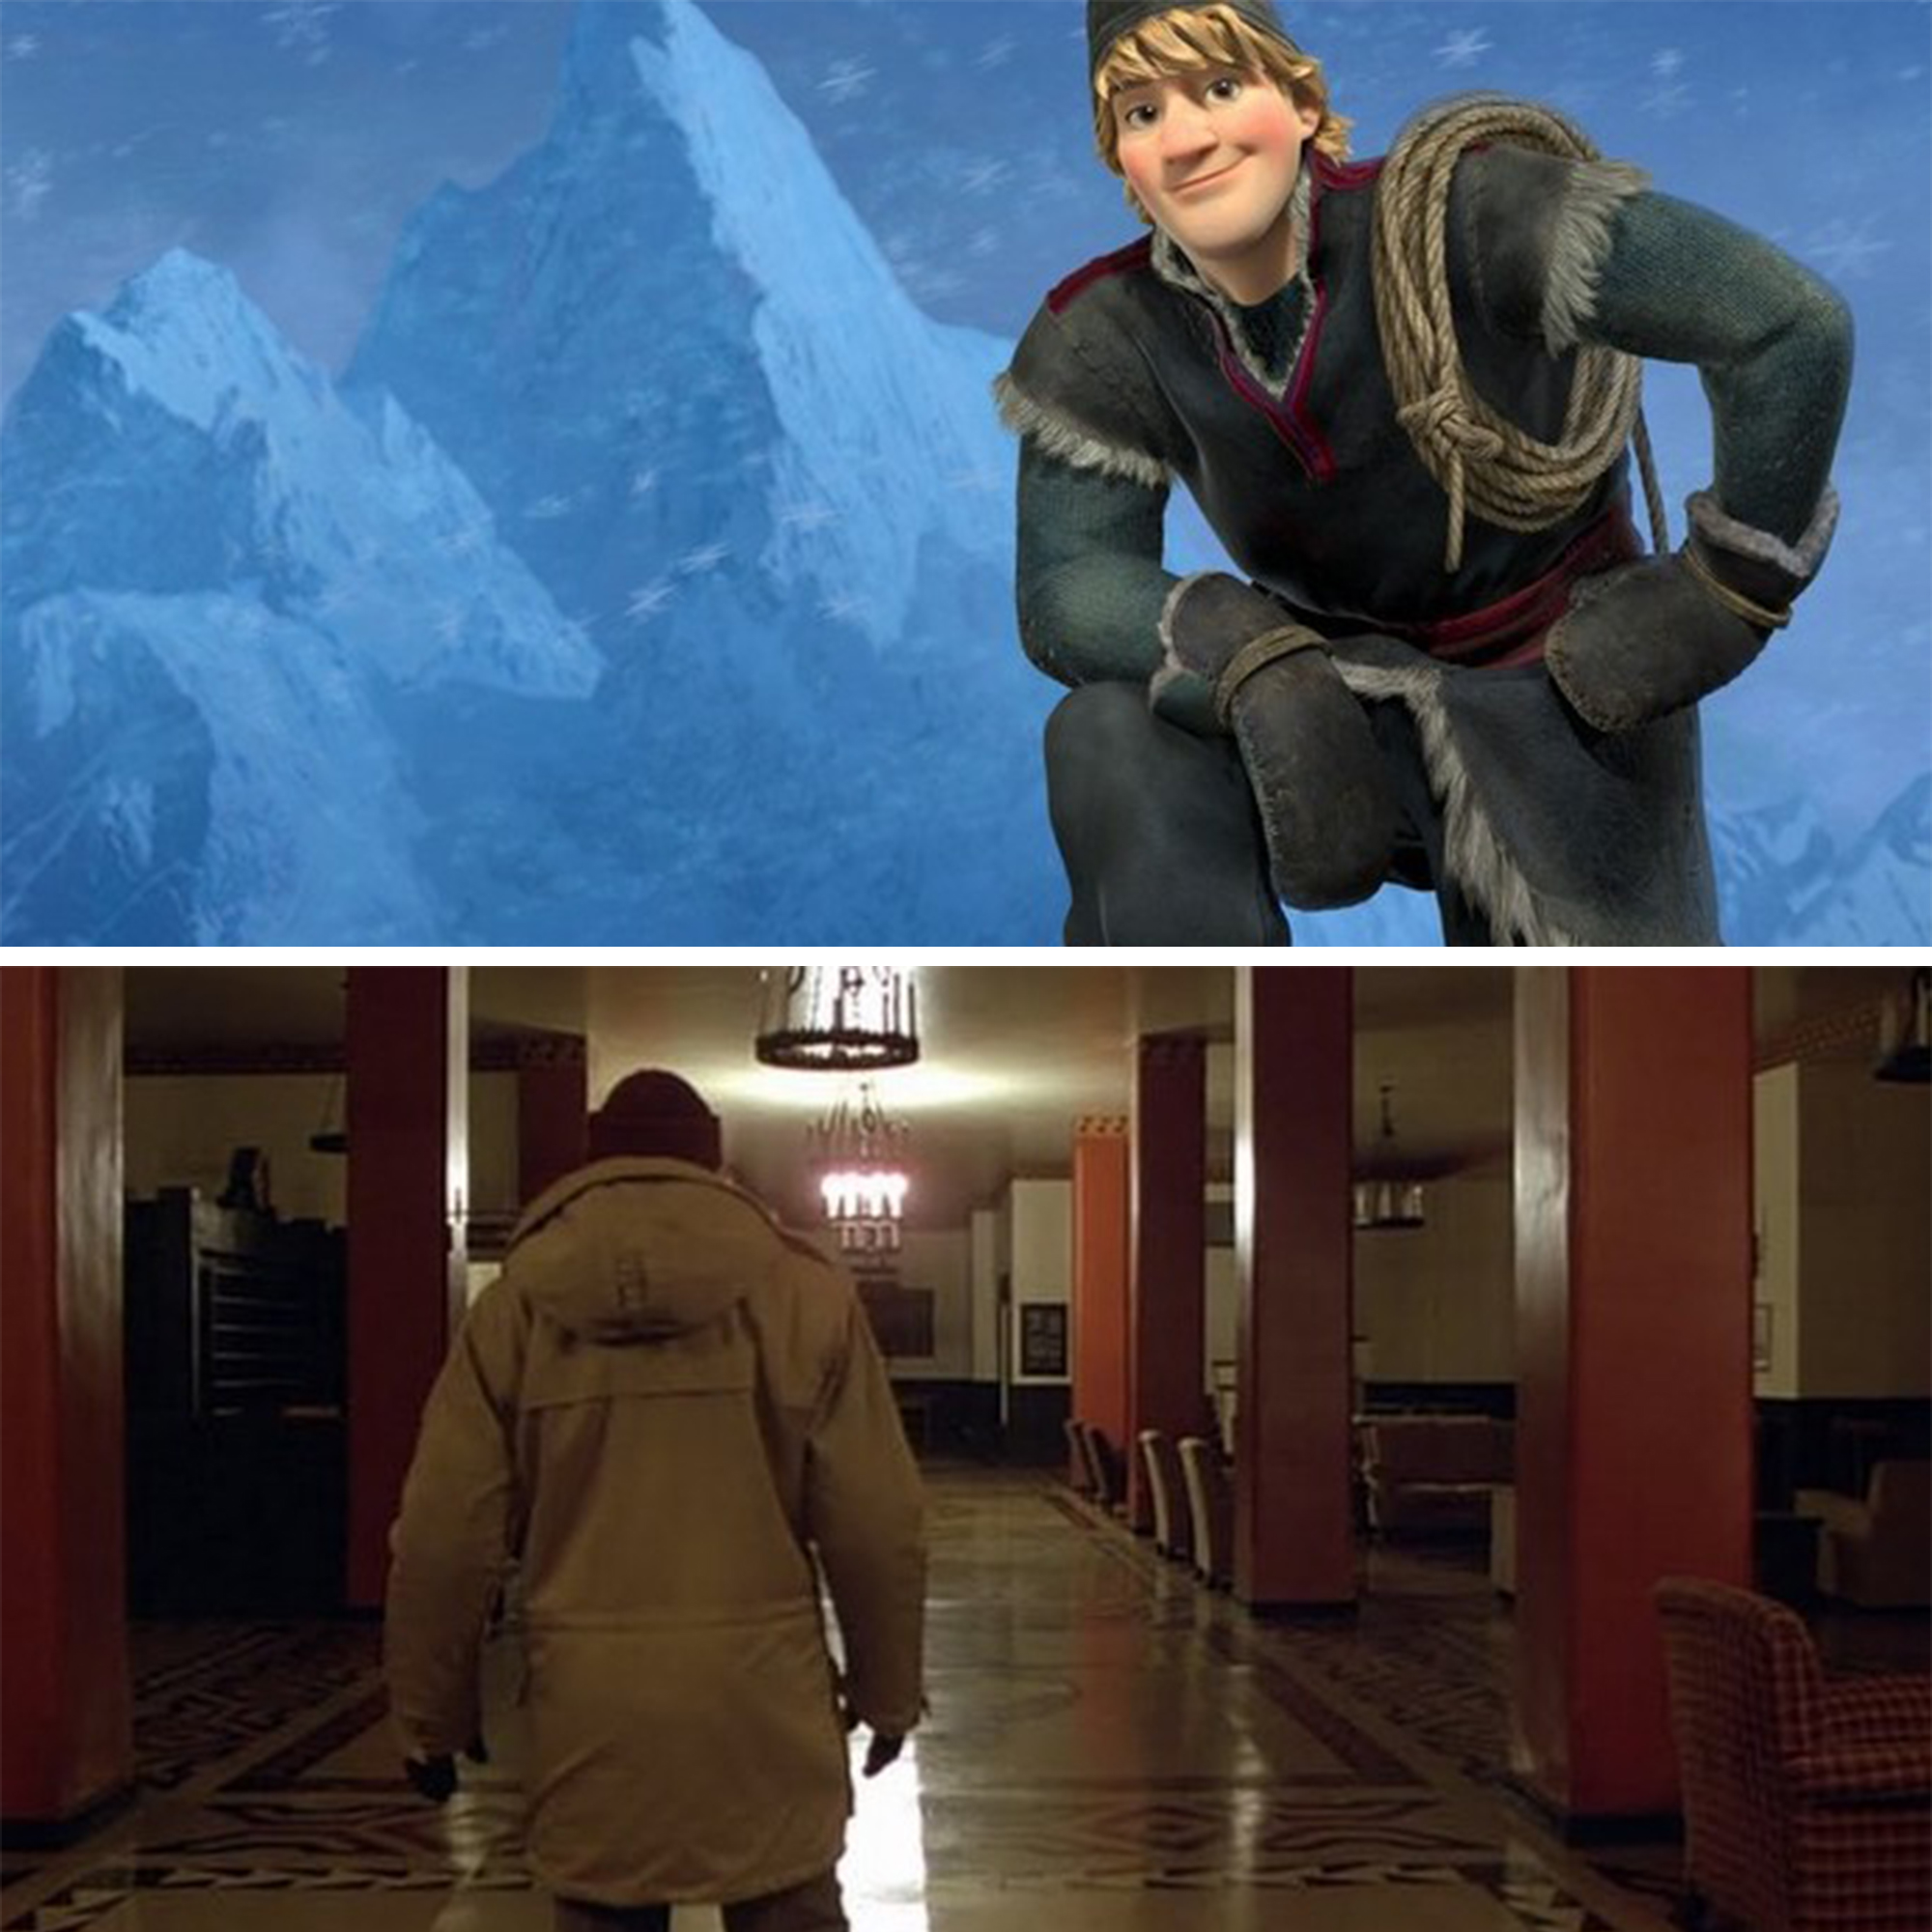 Disney's Frozen and The Shining Conspiracy - kristoff frozen 1